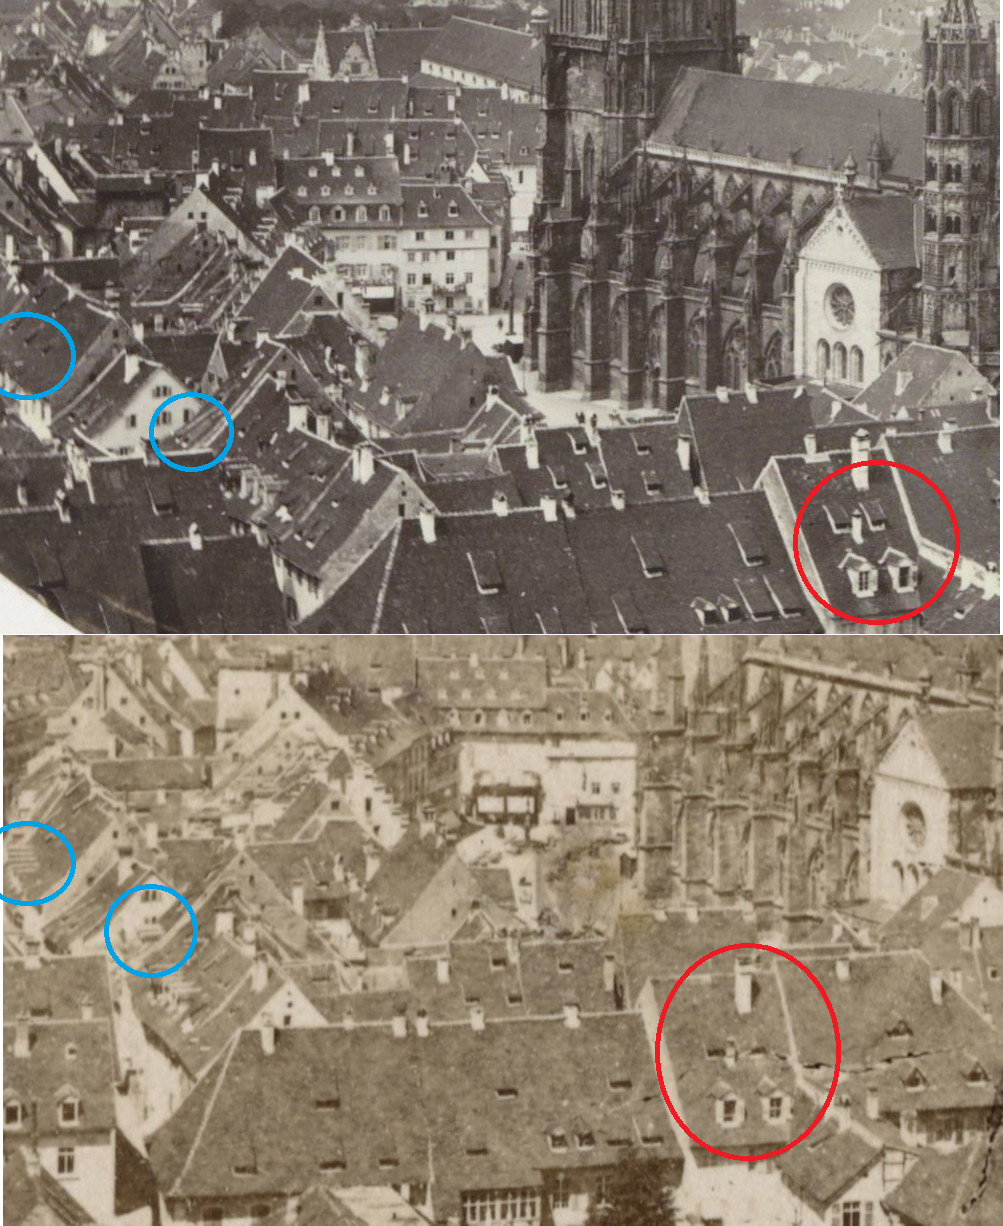 Comparison of dormer windows in houses near Freiburg Cathedral. Image (upper): Rijksmuseum archive, author unknown; Image (lower): Rijksmuseum archive, Gottlieb Theodor Hase